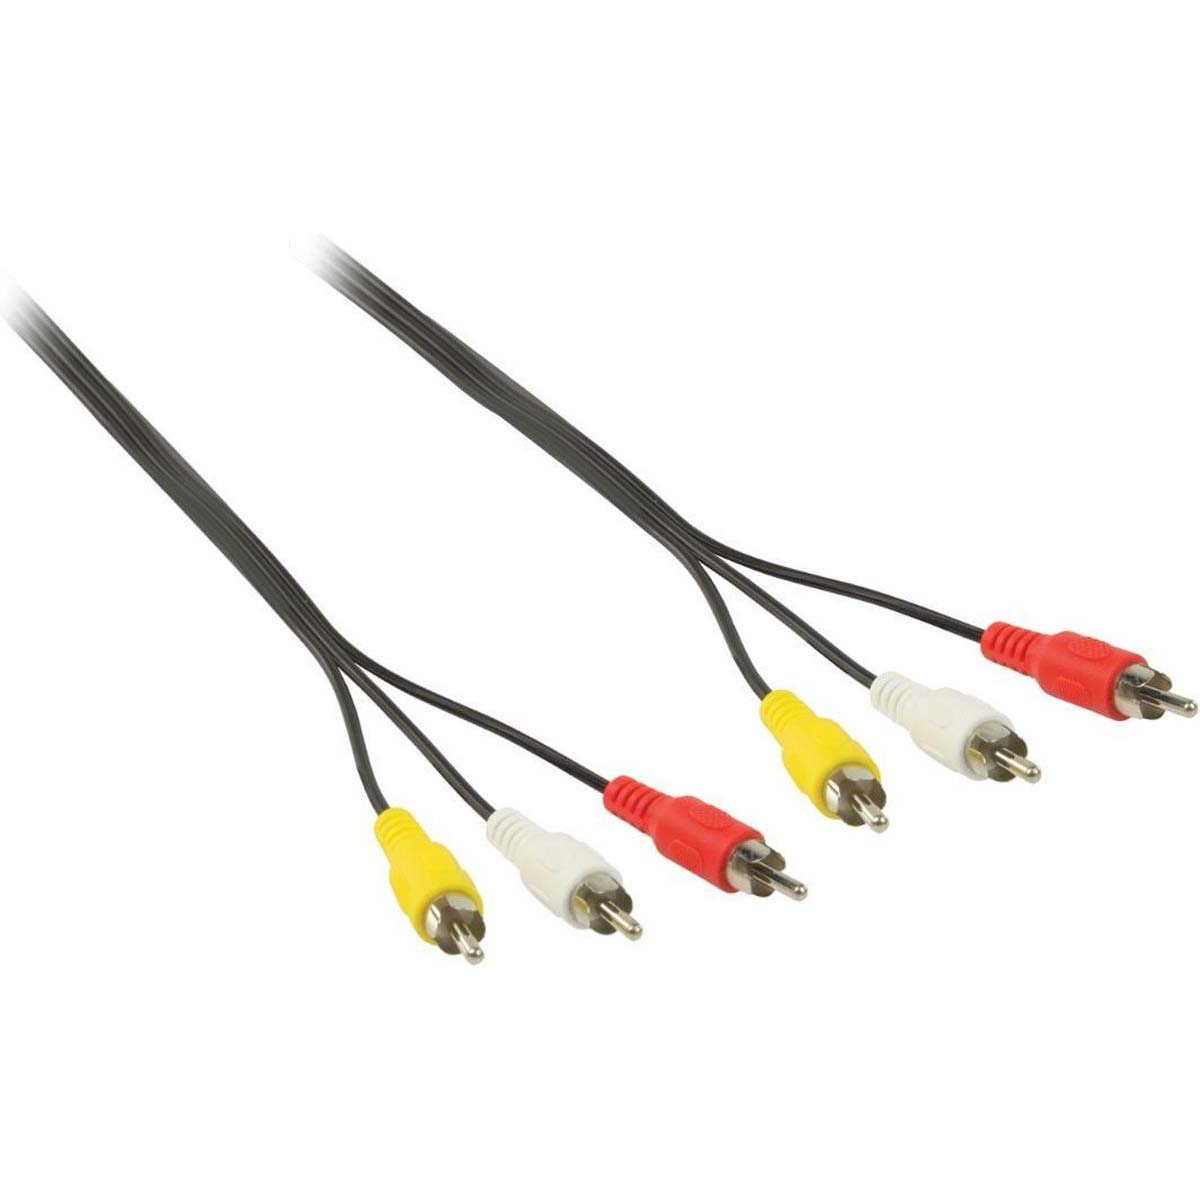 Valueline AV Cable with RCA Male to Male Connectors, 5 Meter AV RCA Cable